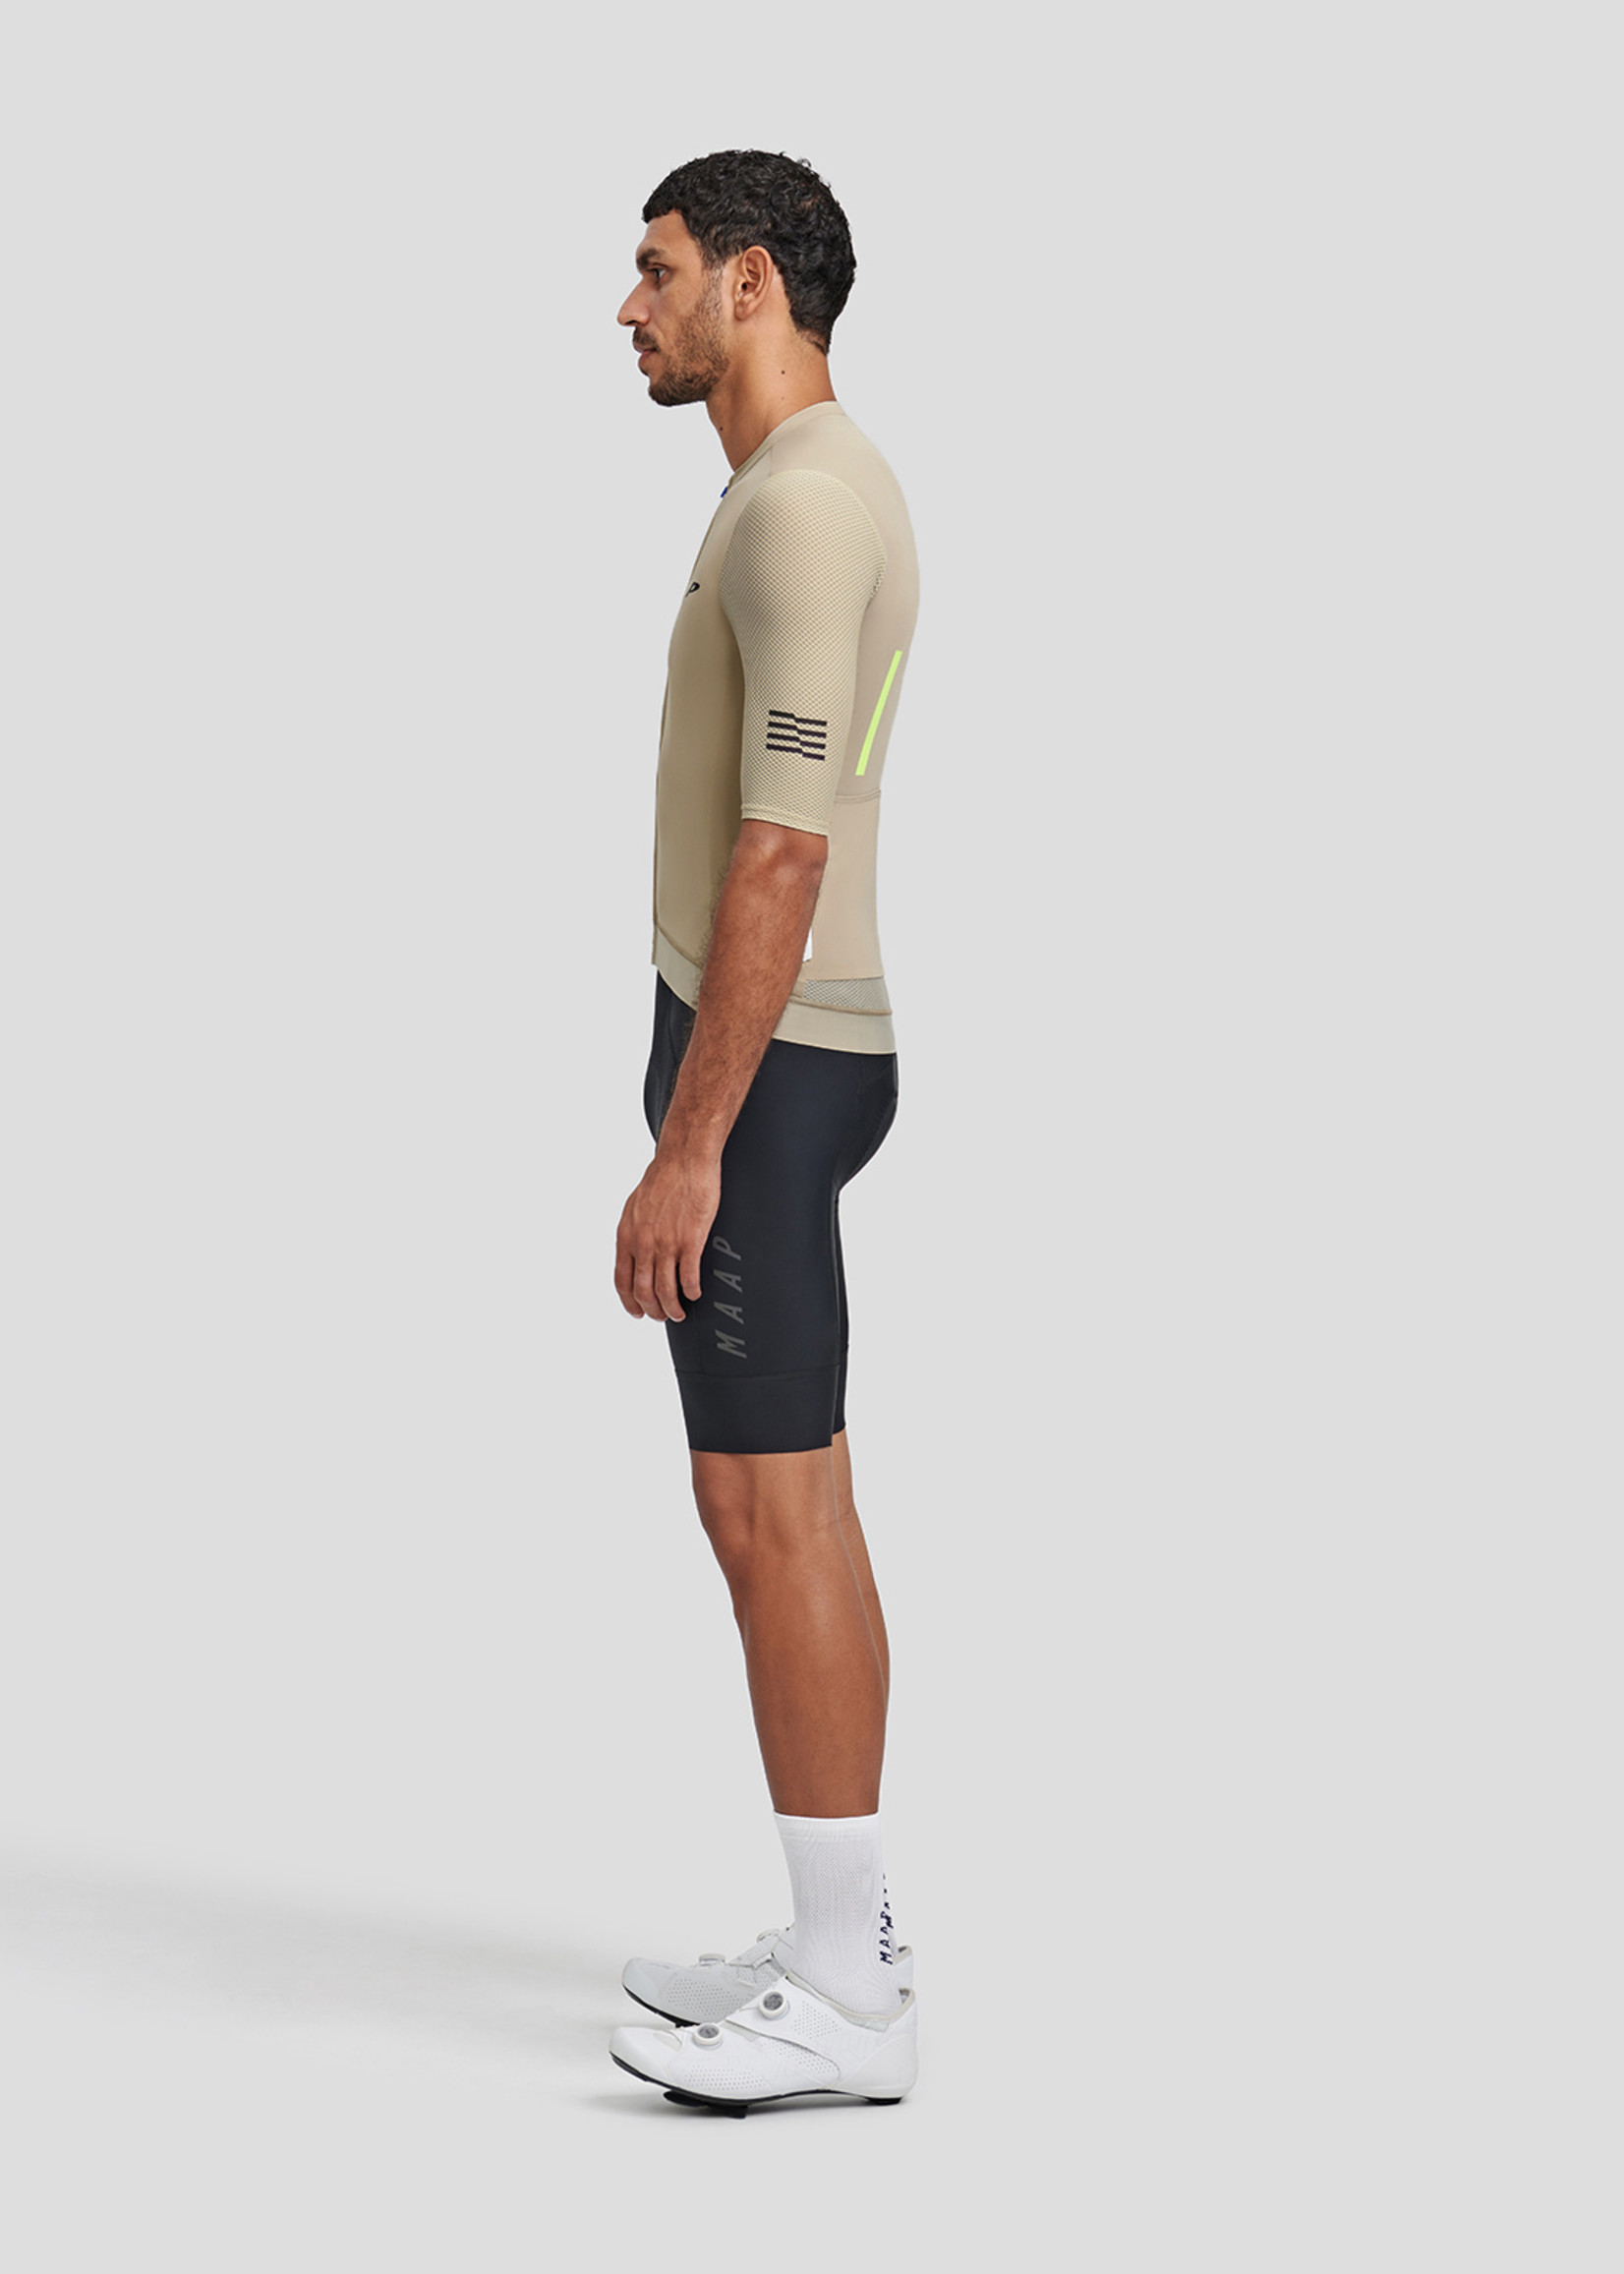 Maap Evade Pro Base Jersey - Taupe